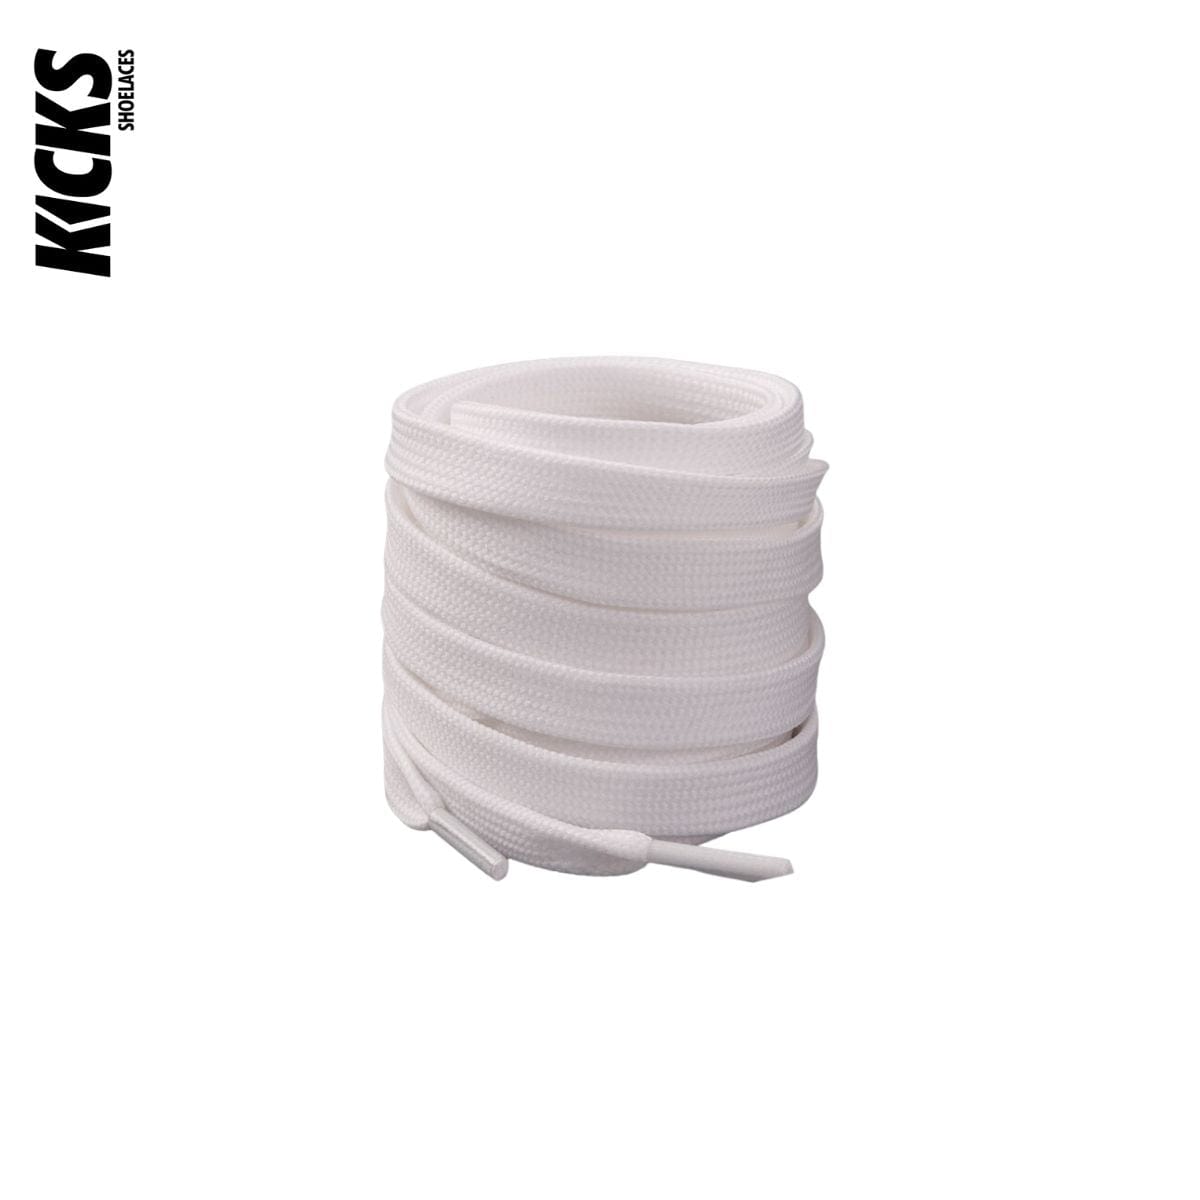 White Replacement Shoe Laces for Adidas NMD Sneakers by Kicks Shoelaces